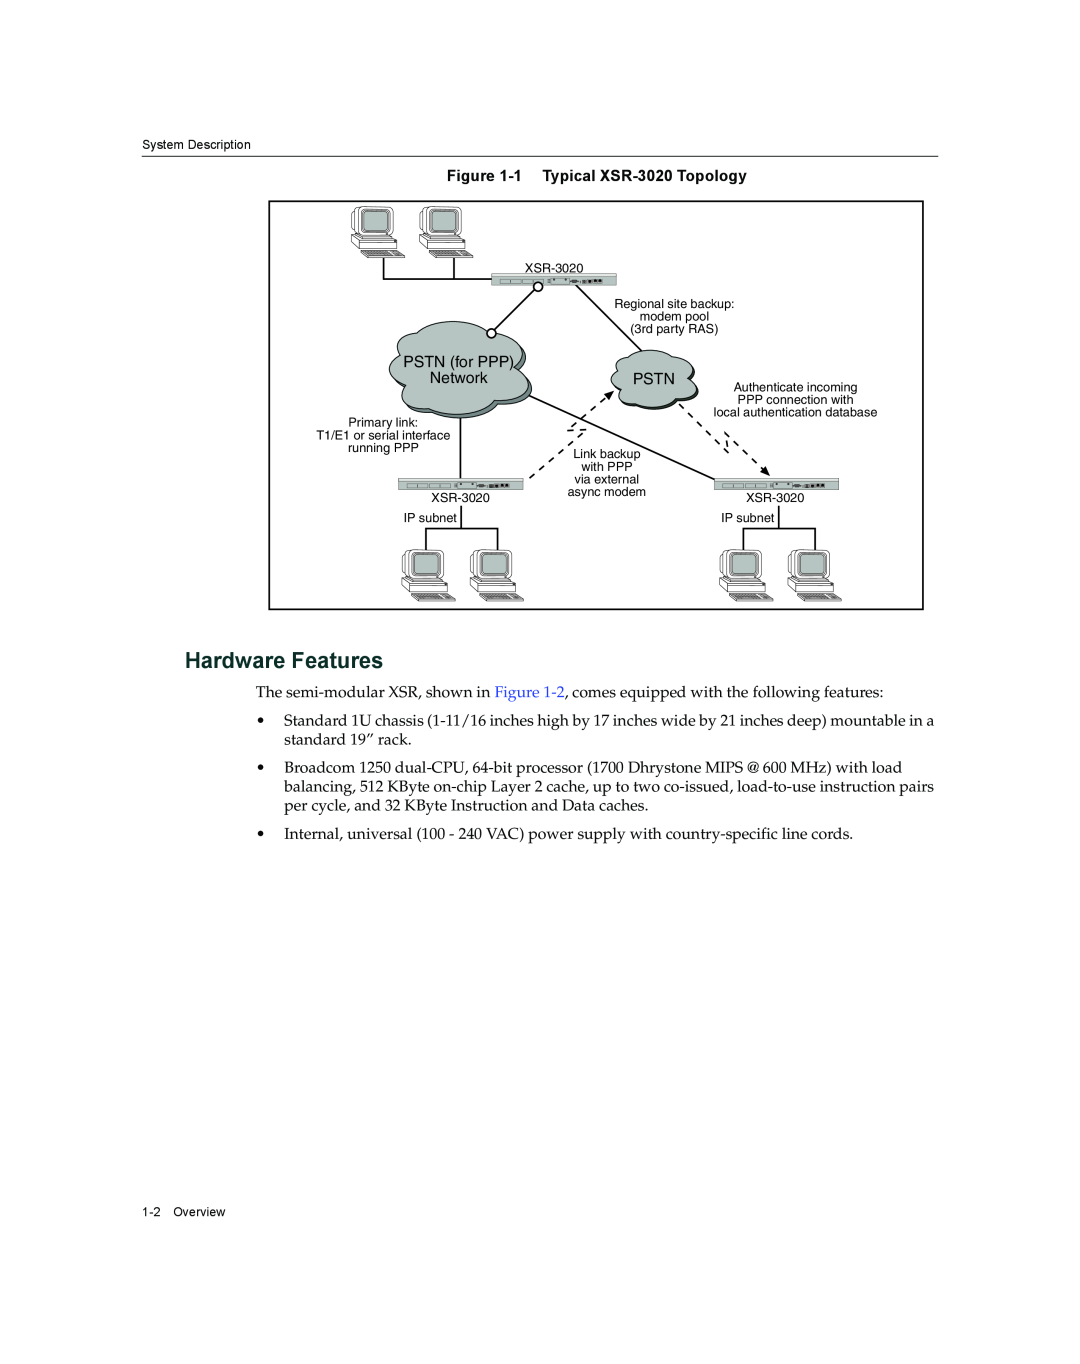 Enterasys Networks manual Hardware Features, 1 Typical XSR-3020 Topology 